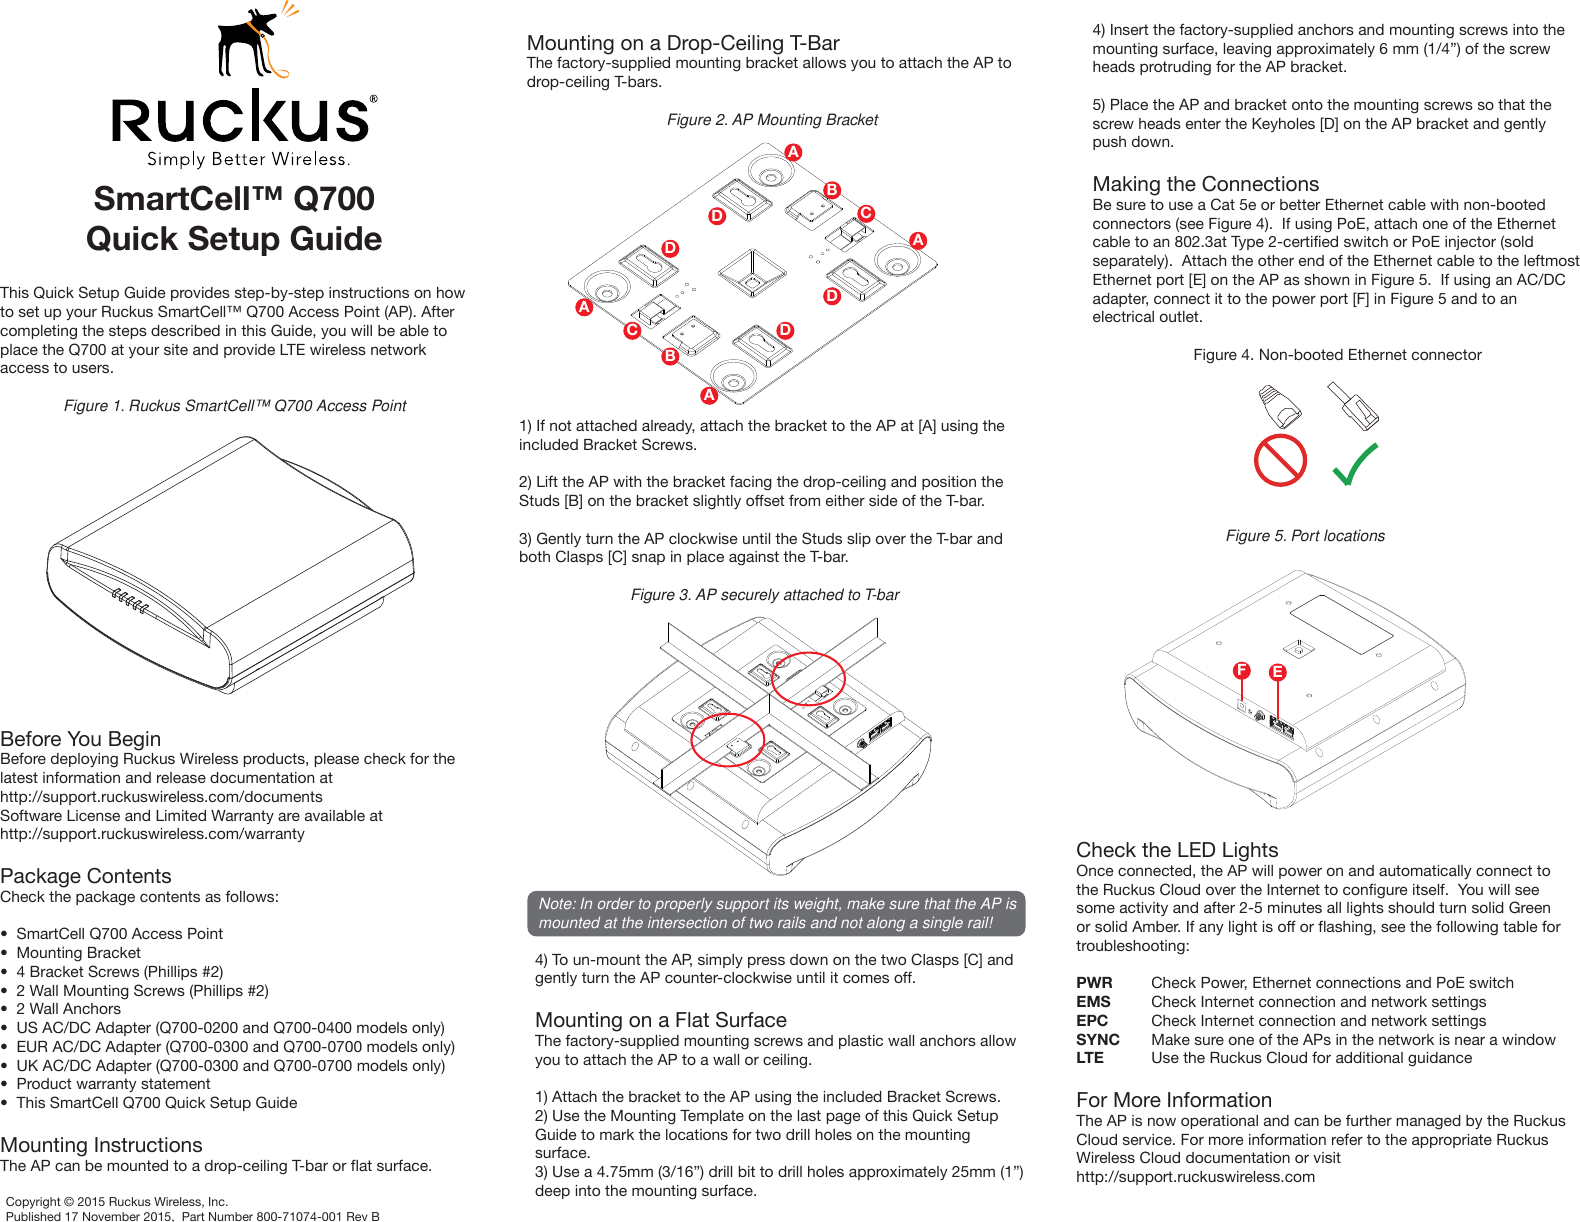 SmartCell™ Q700Quick Setup GuideThis Quick Setup Guide provides step-by-step instructions on how to set up your Ruckus SmartCell™ Q700 Access Point (AP). After completing the steps described in this Guide, you will be able to place the Q700 at your site and provide LTE wireless network access to users.Figure 1. Ruckus SmartCell™ Q700 Access PointBefore You BeginBefore deploying Ruckus Wireless products, please check for the latest information and release documentation athttp://support.ruckuswireless.com/documentsSoftware License and Limited Warranty are available athttp://support.ruckuswireless.com/warrantyPackage ContentsCheck the package contents as follows:•  SmartCell Q700 Access Point•  Mounting Bracket•  4 Bracket Screws (Phillips #2)•  2 Wall Mounting Screws (Phillips #2)•  2 Wall Anchors•  US AC/DC Adapter (Q700-0200 and Q700-0400 models only)•  EUR AC/DC Adapter (Q700-0300 and Q700-0700 models only)•  UK AC/DC Adapter (Q700-0300 and Q700-0700 models only)•  Product warranty statement•  This SmartCell Q700 Quick Setup GuideMounting InstructionsThe AP can be mounted to a drop-ceiling T-bar or flat surface.Mounting on a Drop-Ceiling T-BarThe factory-supplied mounting bracket allows you to attach the AP to drop-ceiling T-bars.Figure 2. AP Mounting Bracket1) If not attached already, attach the bracket to the AP at [A] using the included Bracket Screws.2) Lift the AP with the bracket facing the drop-ceiling and position the Studs [B] on the bracket slightly offset from either side of the T-bar.3) Gently turn the AP clockwise until the Studs slip over the T-bar and both Clasps [C] snap in place against the T-bar.Figure 3. AP securely attached to T-barNote: In order to properly support its weight, make sure that the AP is mounted at the intersection of two rails and not along a single rail!4) To un-mount the AP, simply press down on the two Clasps [C] and gently turn the AP counter-clockwise until it comes off.Mounting on a Flat SurfaceThe factory-supplied mounting screws and plastic wall anchors allow you to attach the AP to a wall or ceiling.1) Attach the bracket to the AP using the included Bracket Screws.2) Use the Mounting Template on the last page of this Quick Setup Guide to mark the locations for two drill holes on the mounting surface.3) Use a 4.75mm (3/16”) drill bit to drill holes approximately 25mm (1”) deep into the mounting surface.4) Insert the factory-supplied anchors and mounting screws into the mounting surface, leaving approximately 6 mm (1/4”) of the screw heads protruding for the AP bracket.5) Place the AP and bracket onto the mounting screws so that the screw heads enter the Keyholes [D] on the AP bracket and gently push down.Making the ConnectionsBe sure to use a Cat 5e or better Ethernet cable with non-booted connectors (see Figure 4).  If using PoE, attach one of the Ethernet cable to an 802.3at Type 2-certified switch or PoE injector (sold separately).  Attach the other end of the Ethernet cable to the leftmost Ethernet port [E] on the AP as shown in Figure 5.  If using an AC/DC adapter, connect it to the power port [F] in Figure 5 and to an electrical outlet.Figure 4. Non-booted Ethernet connectorFigure 5. Port locationsCheck the LED LightsOnce connected, the AP will power on and automatically connect to the Ruckus Cloud over the Internet to configure itself.  You will see some activity and after 2-5 minutes all lights should turn solid Green or solid Amber. If any light is off or flashing, see the following table for troubleshooting: PWR  Check Power, Ethernet connections and PoE switchEMS  Check Internet connection and network settingsEPC  Check Internet connection and network settingsSYNC  Make sure one of the APs in the network is near a windowLTE  Use the Ruckus Cloud for additional guidanceFor More InformationThe AP is now operational and can be further managed by the Ruckus Cloud service. For more information refer to the appropriate Ruckus Wireless Cloud documentation or visithttp://support.ruckuswireless.comAAAABBCCDDDDEFCopyright © 2015 Ruckus Wireless, Inc.Published 17 November 2015,  Part Number 800-71074-001 Rev B